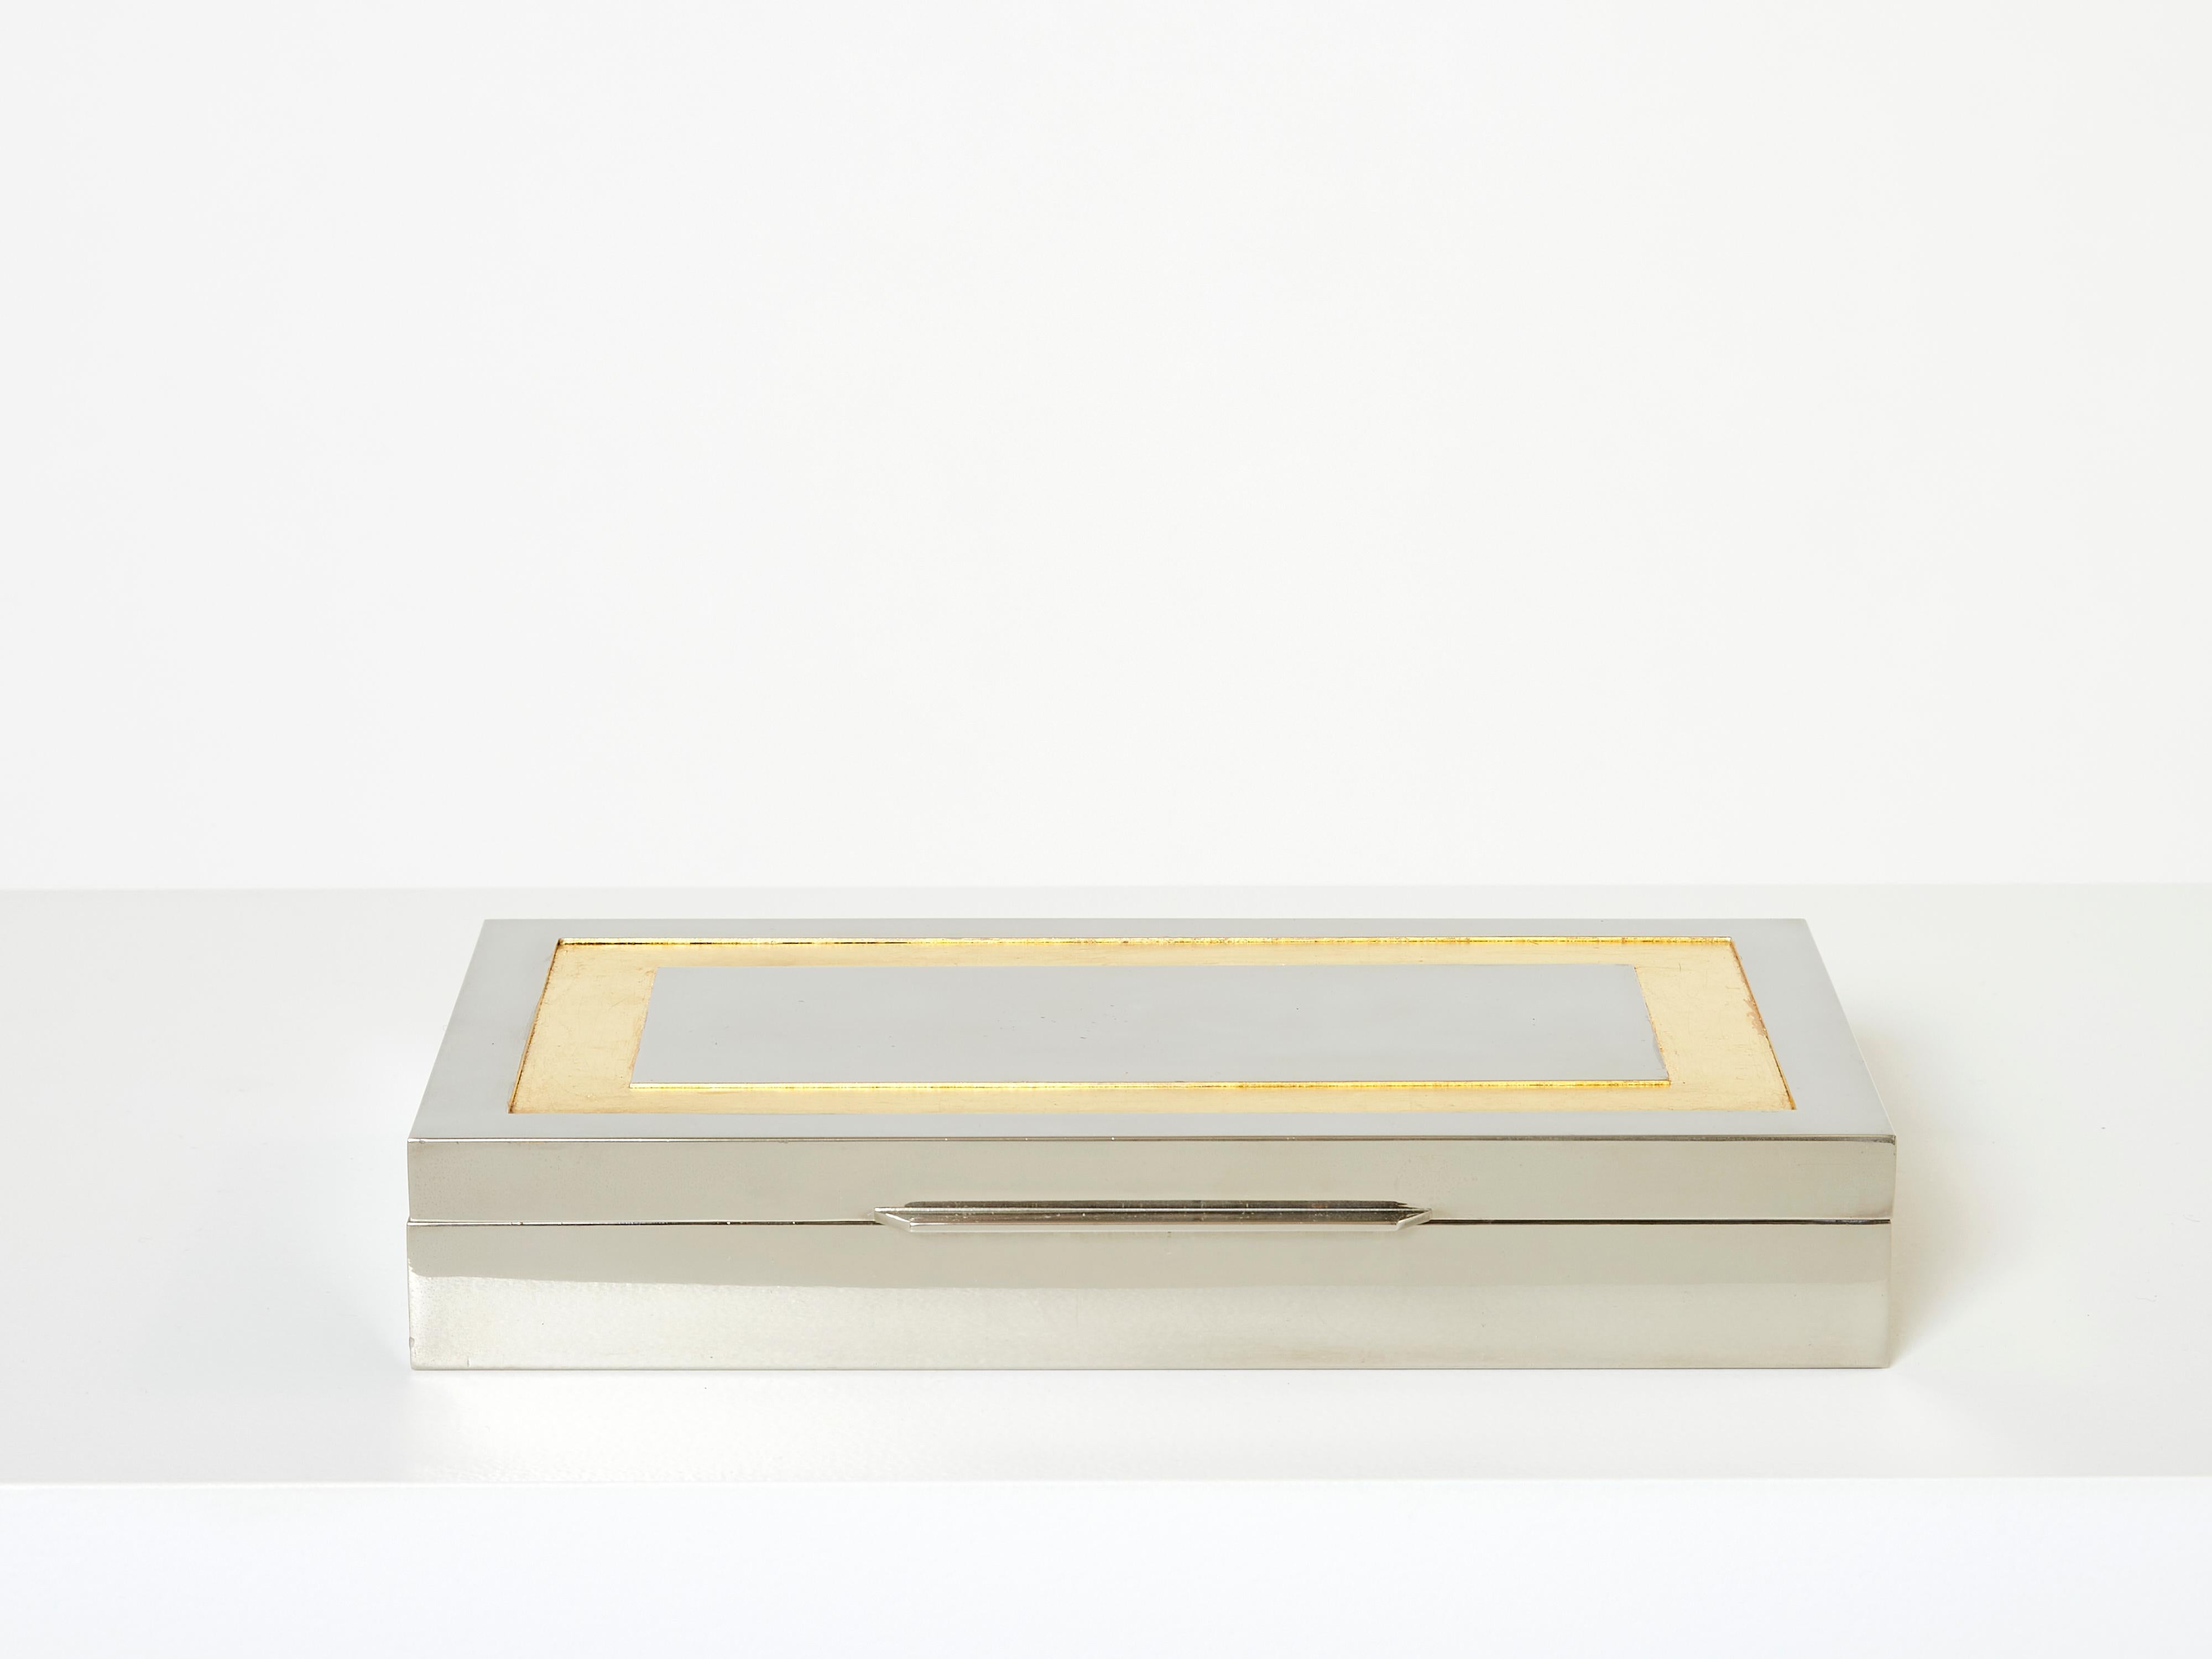 Beautiful Italian Mid-Century decorative box designed by Giacomo Sinopoli and produced by Liwan’s Rome in the late 1970s. This chrome jewellery box features a beautiful gold leaf gilded frame on the top, with an interior covered with mahogany wood